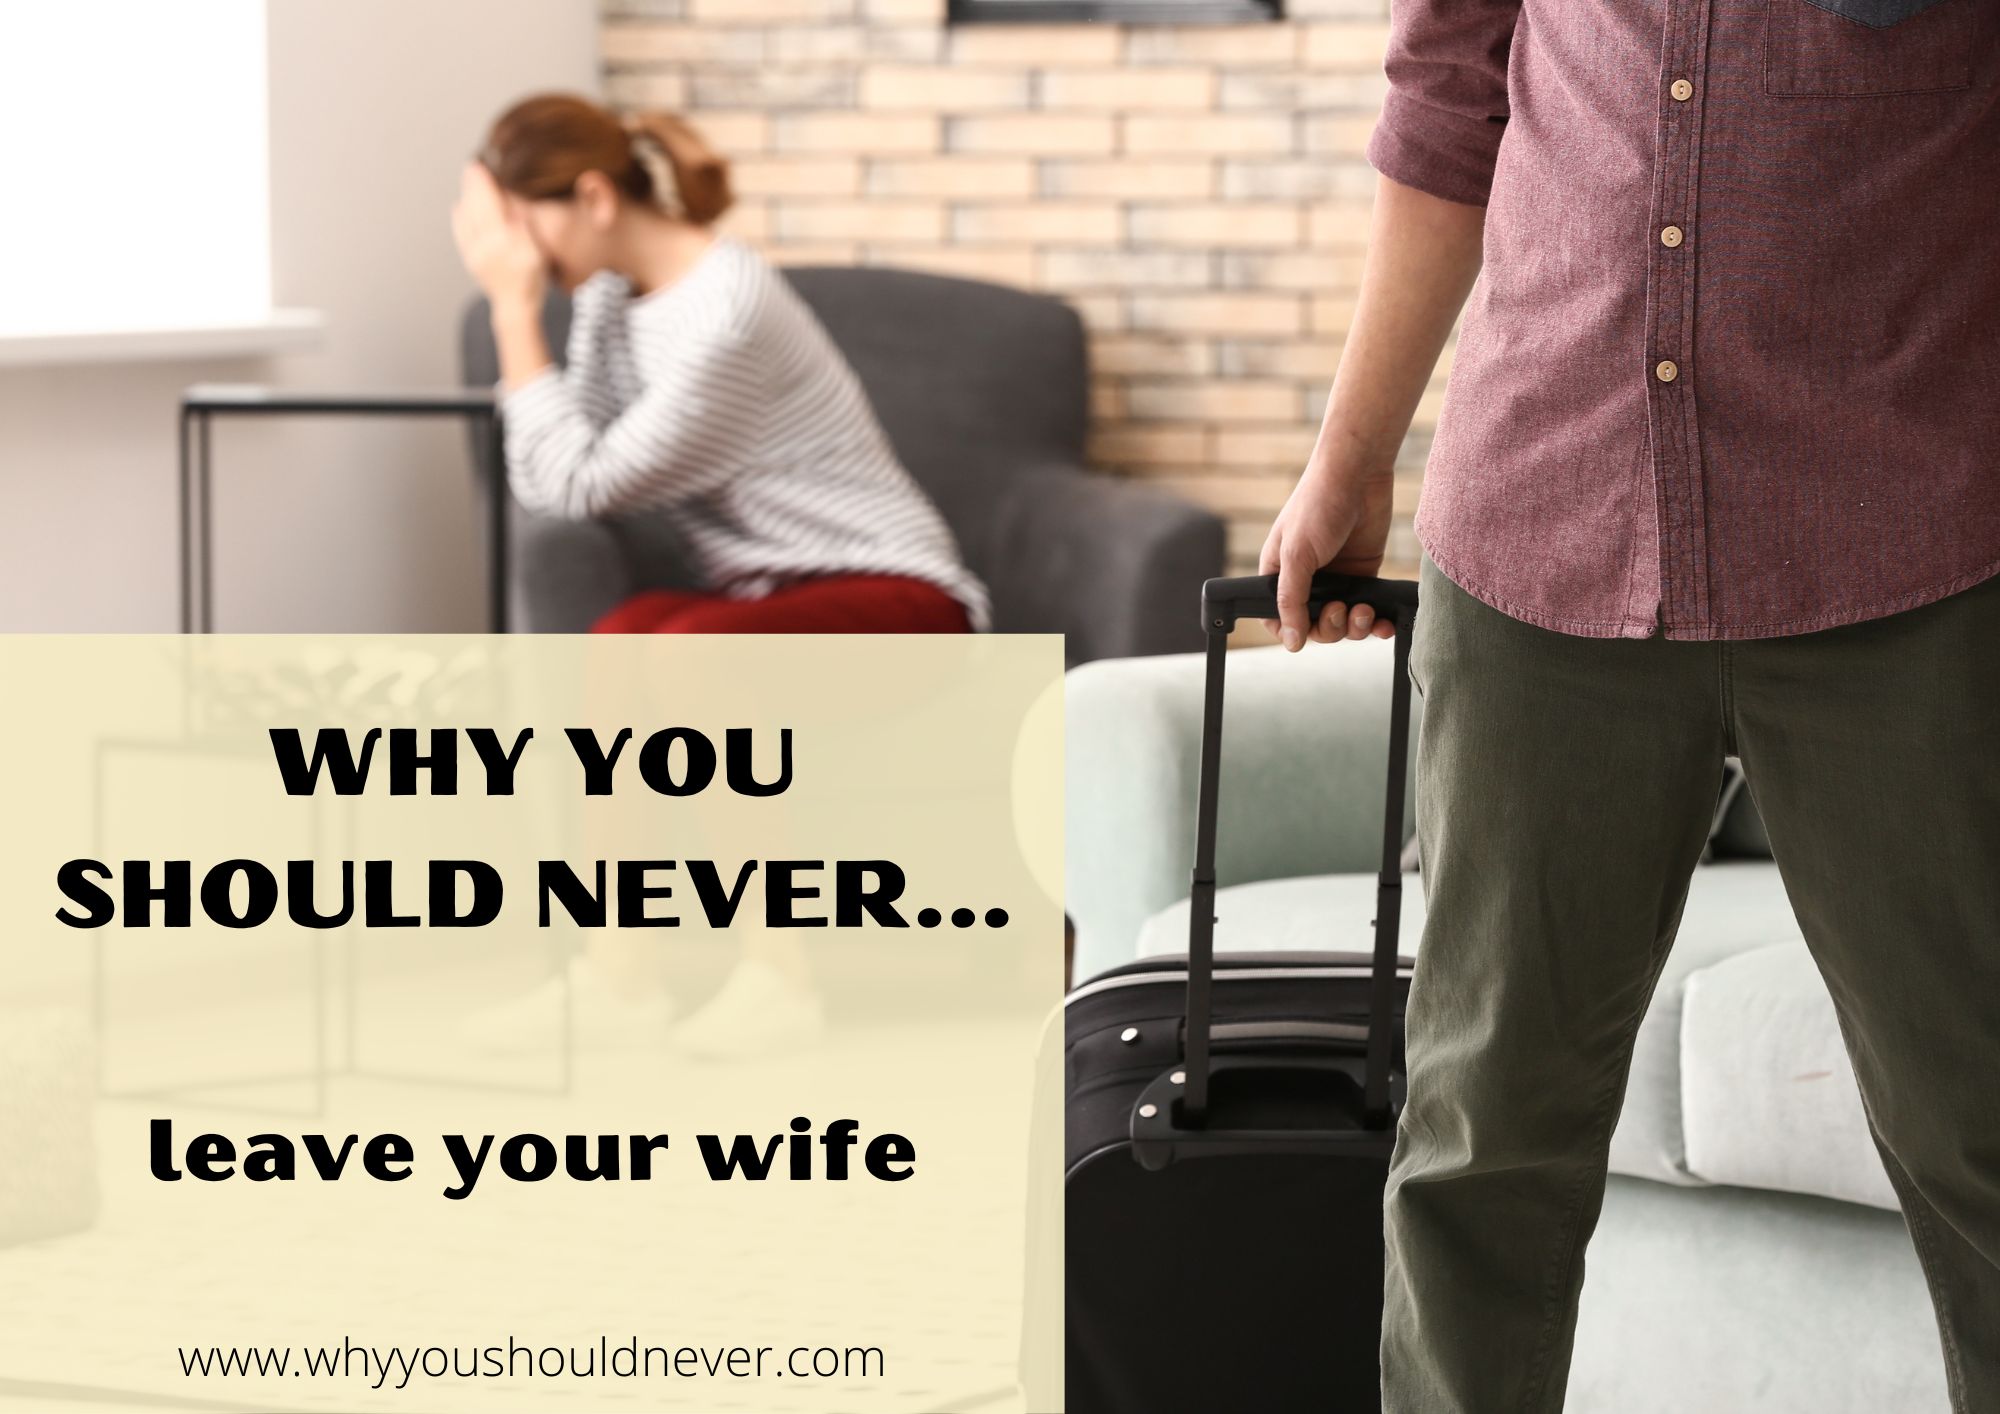 Why You Should Never Leave Your Wife